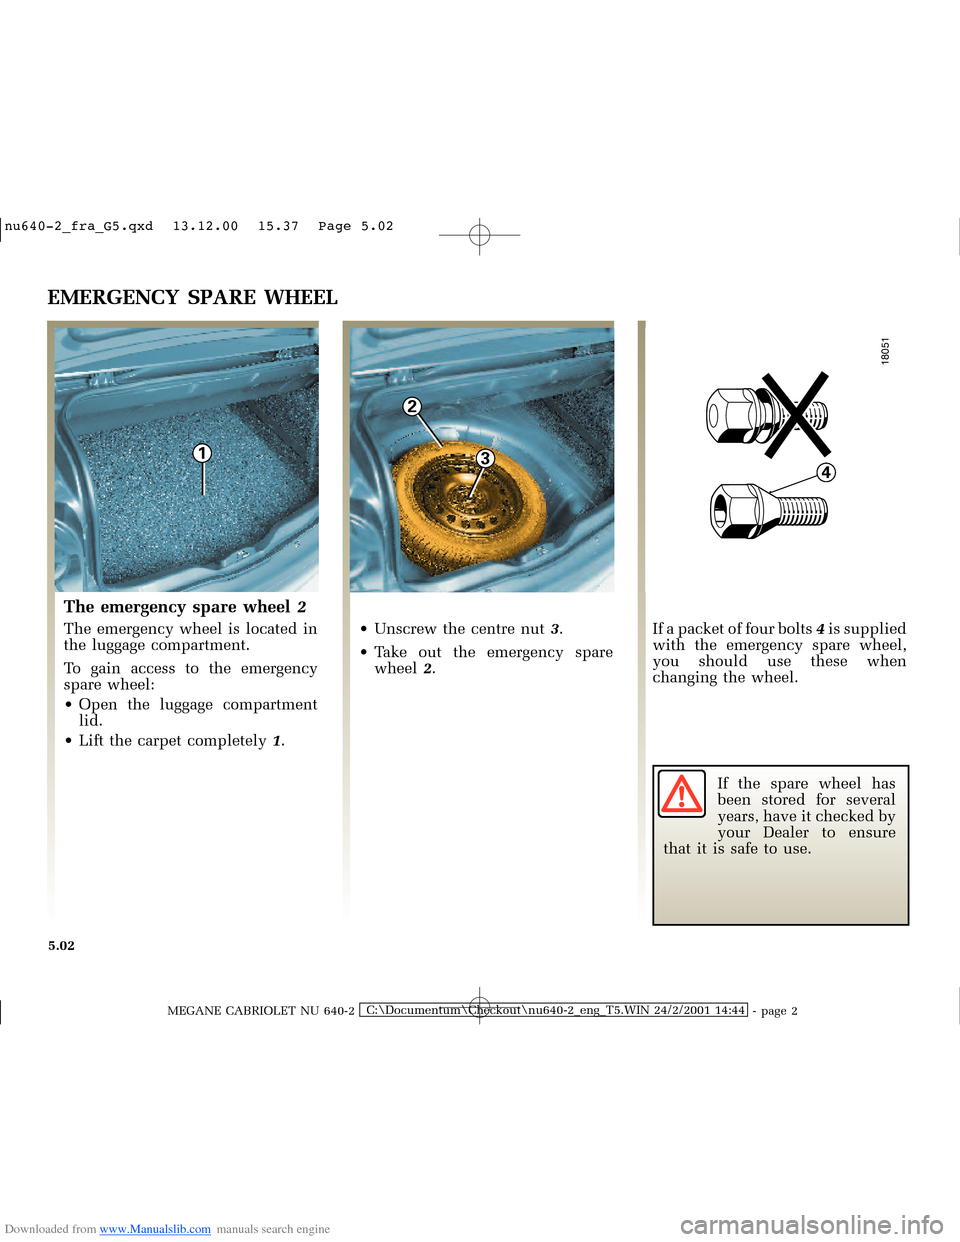 RENAULT MEGANE 2000 X64 / 1.G Owners Manual Downloaded from www.Manualslib.com manuals search engine 1
2
3
�����
4
�Q�X������B�I�U�D�B�*���T�[�G� � ��������� � ������ � �3�D�J�H� ����
MEGANE CABRIOLET NU 640-